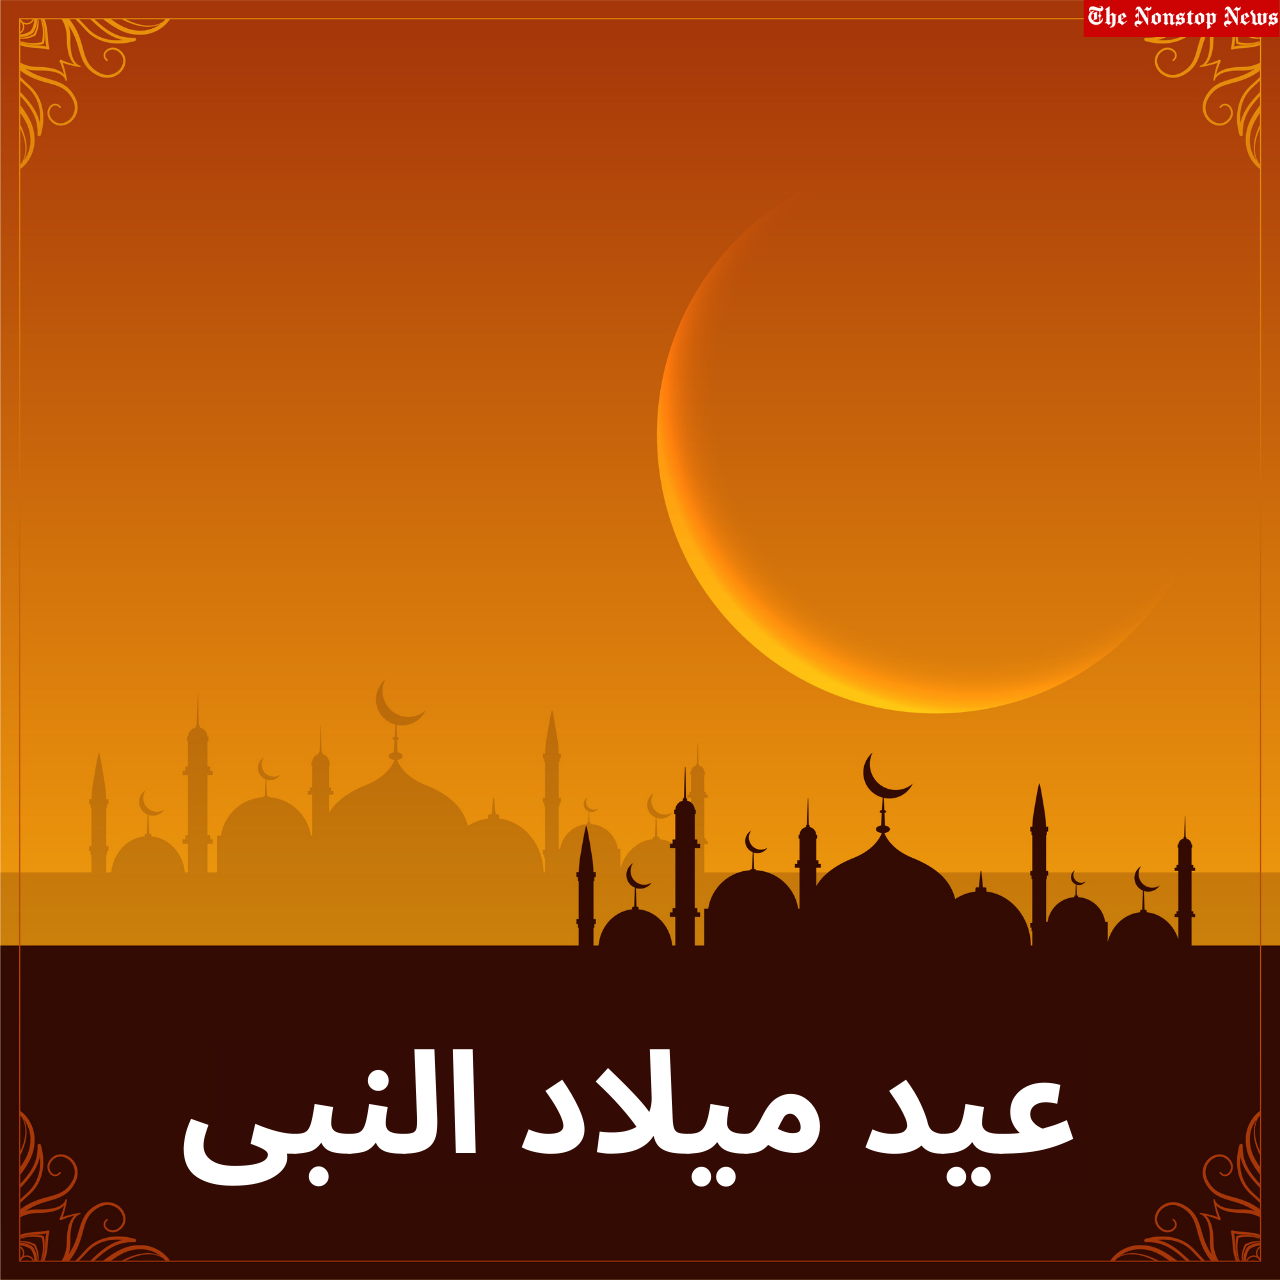 Eid Milad Un-Nabi 2022 Dua in Urdu Messages, Wishes, Greetings, Shayari, Quotes, and Images